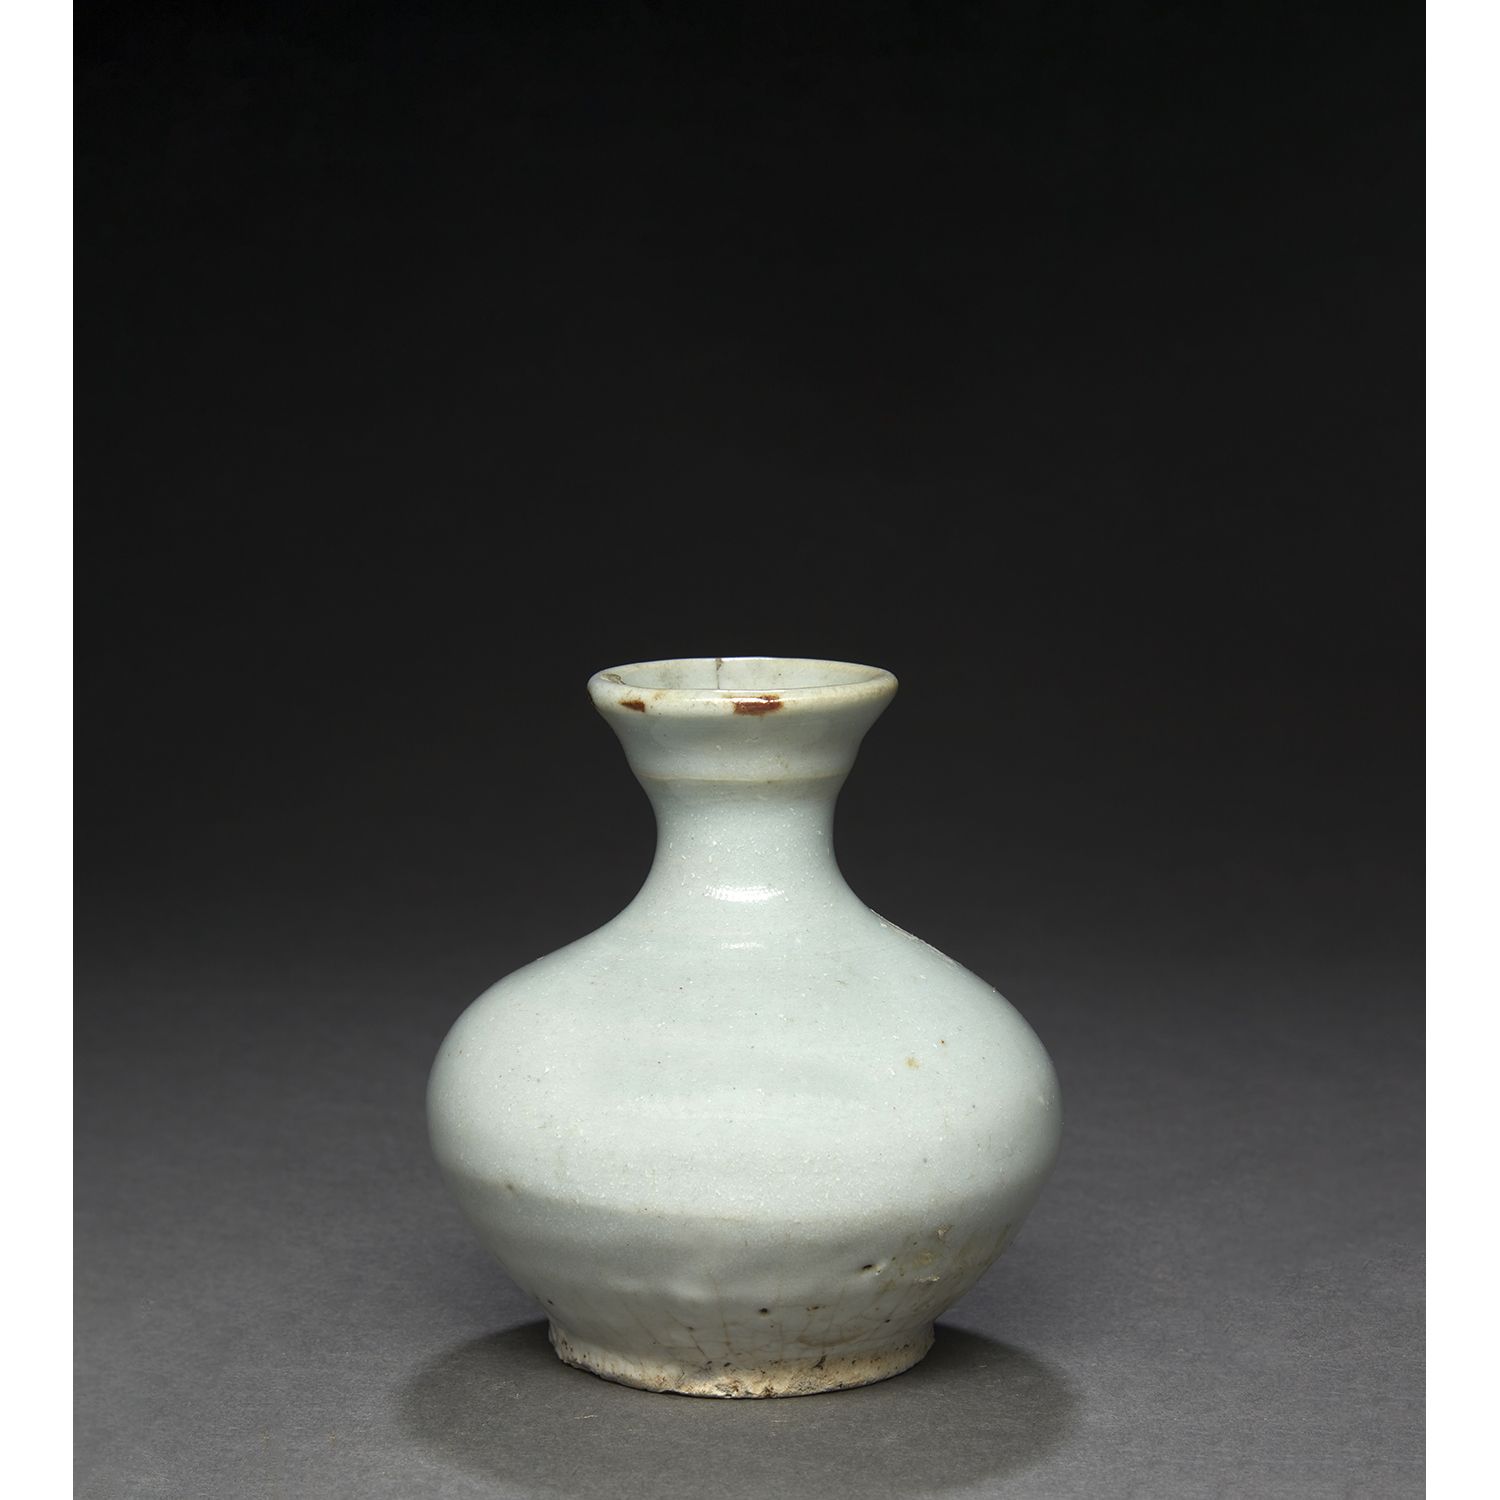 Null SMALL OIL BOTTLE
in white glazed porcelain, with a small neck.
(Crack).
Kor&hellip;